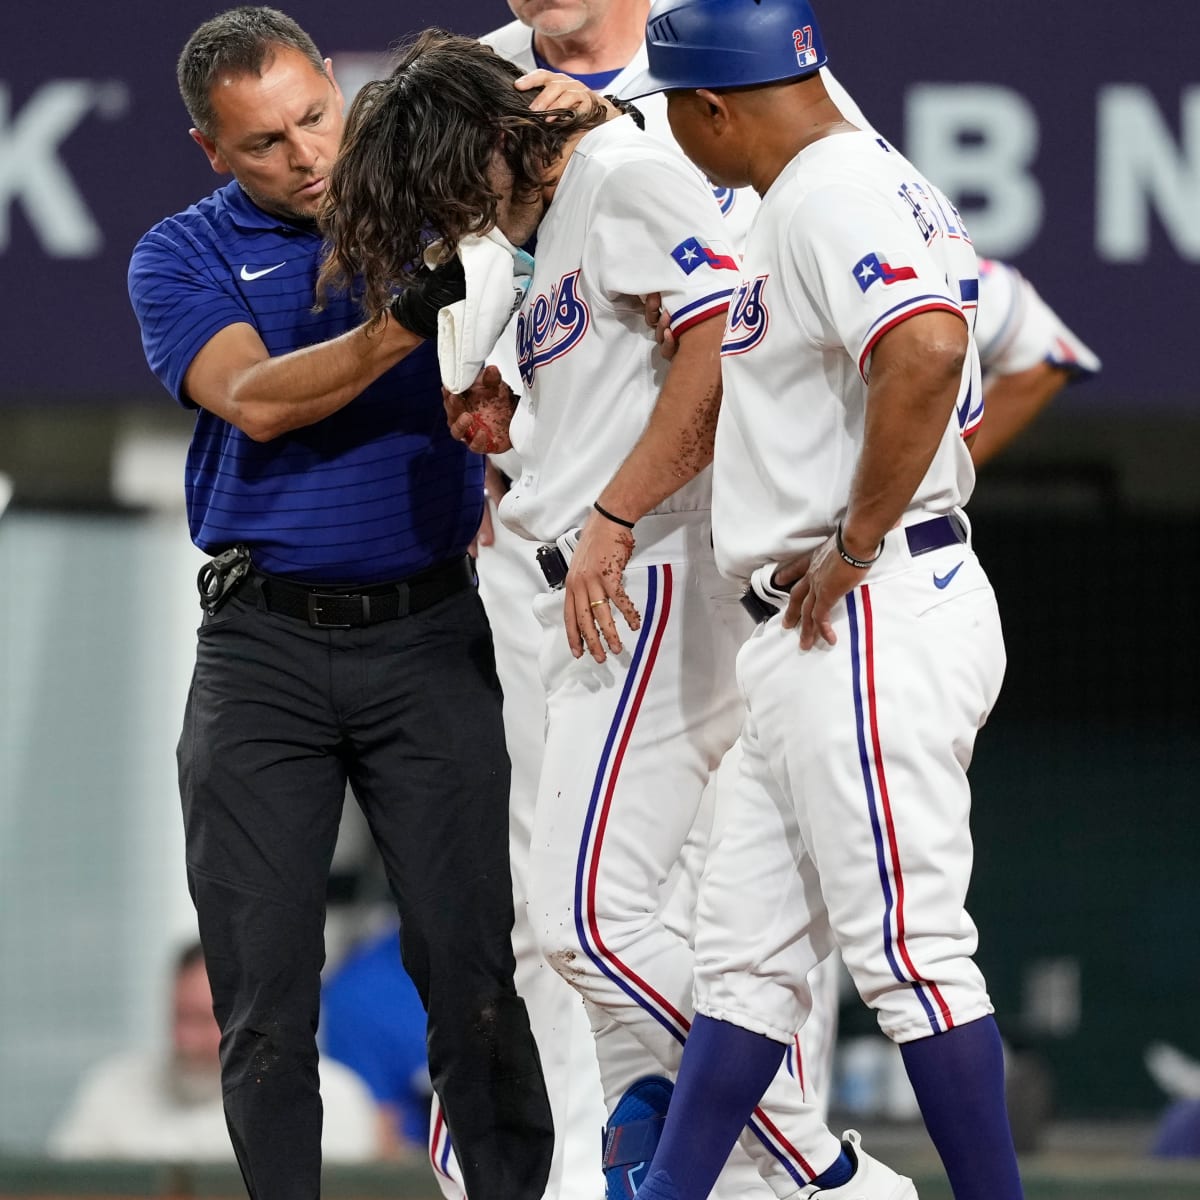 Josh Smith gets hit in face as Rangers lose 2-0 to Orioles - CBS Texas